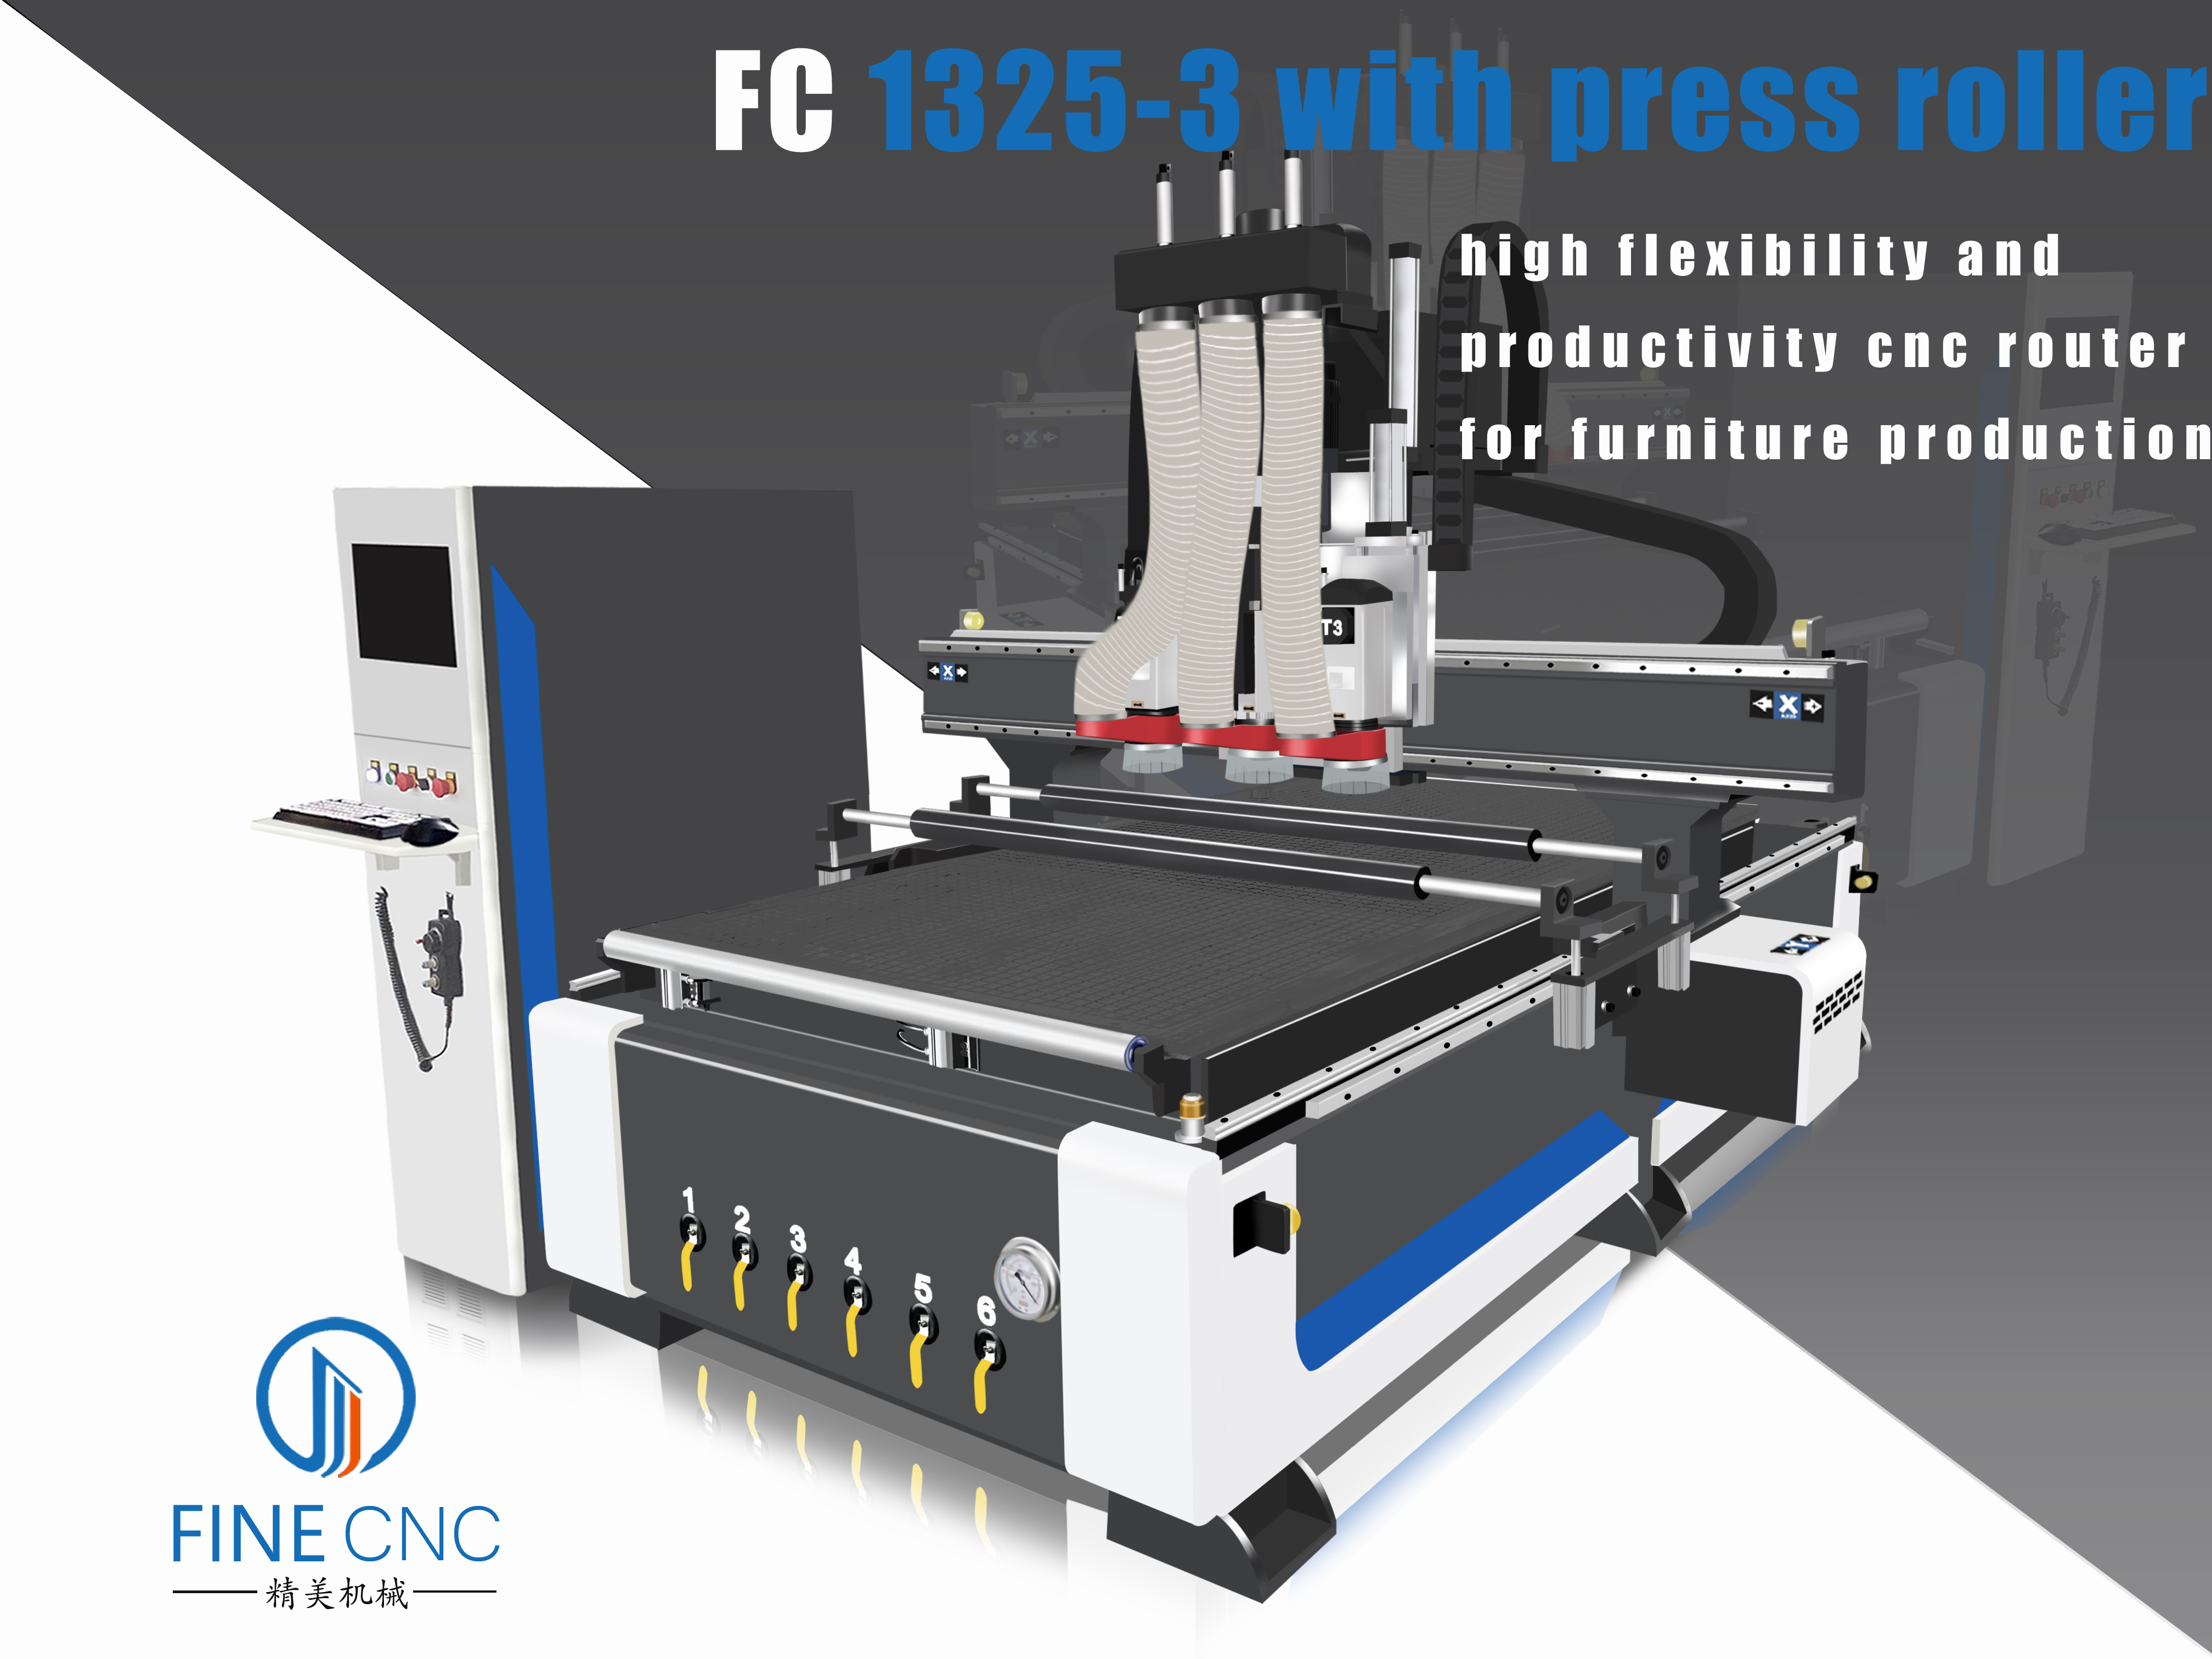 FC1325-3 CNC Router With Press Roller